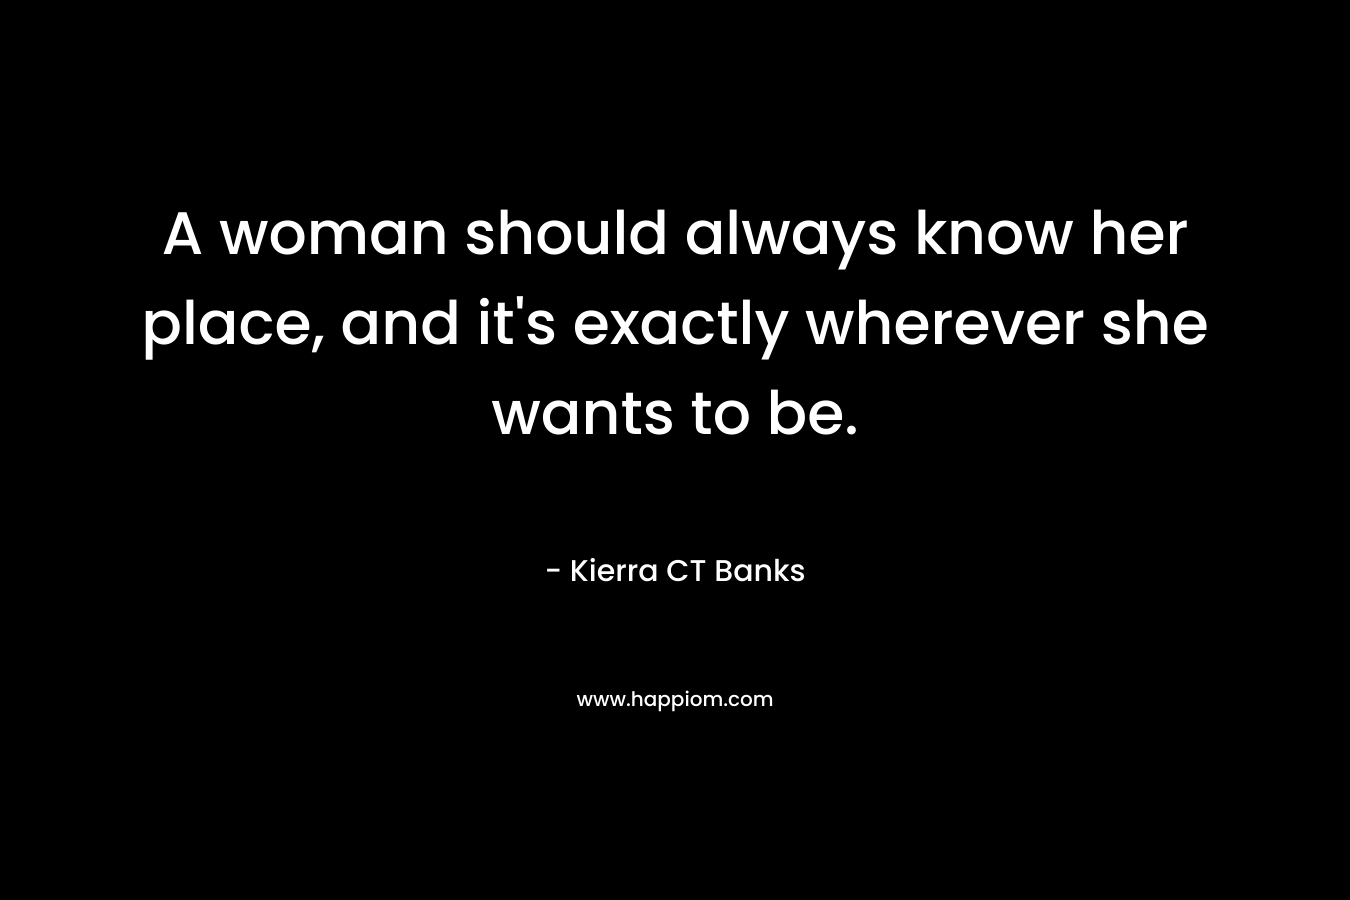 A woman should always know her place, and it's exactly wherever she wants to be.